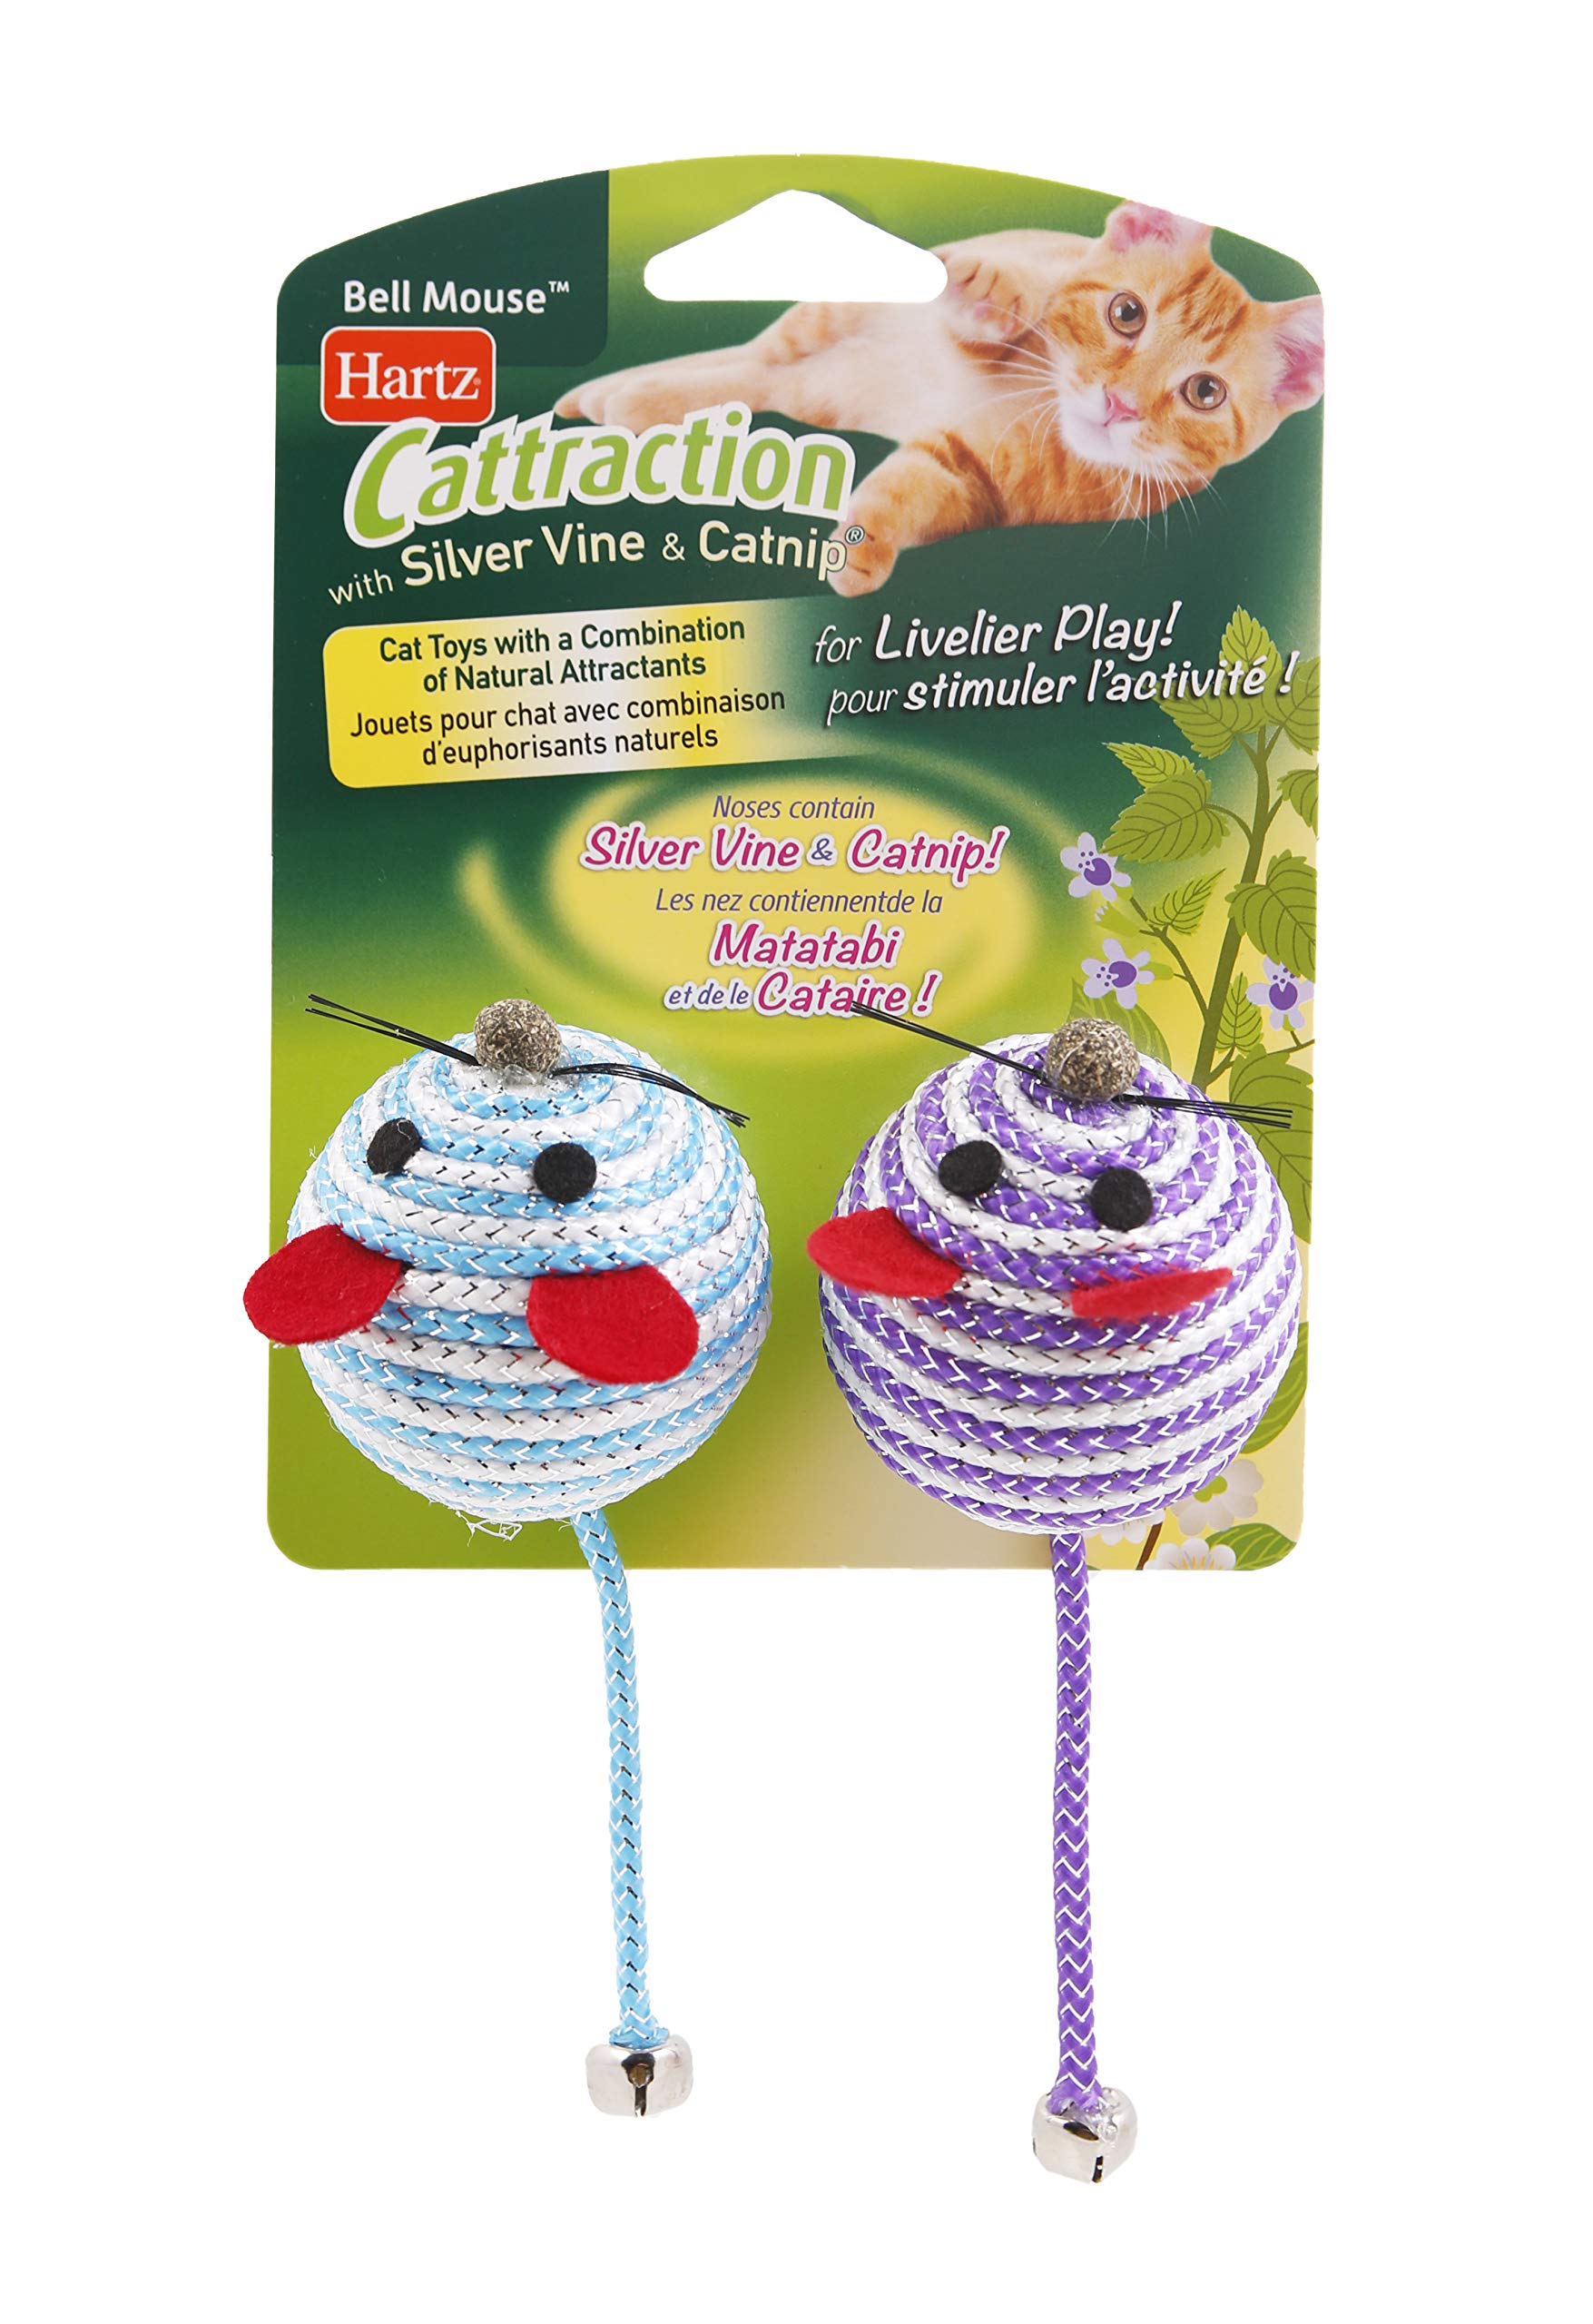 Bell Mouse Cat Toy with Two Silver Vine Catnip